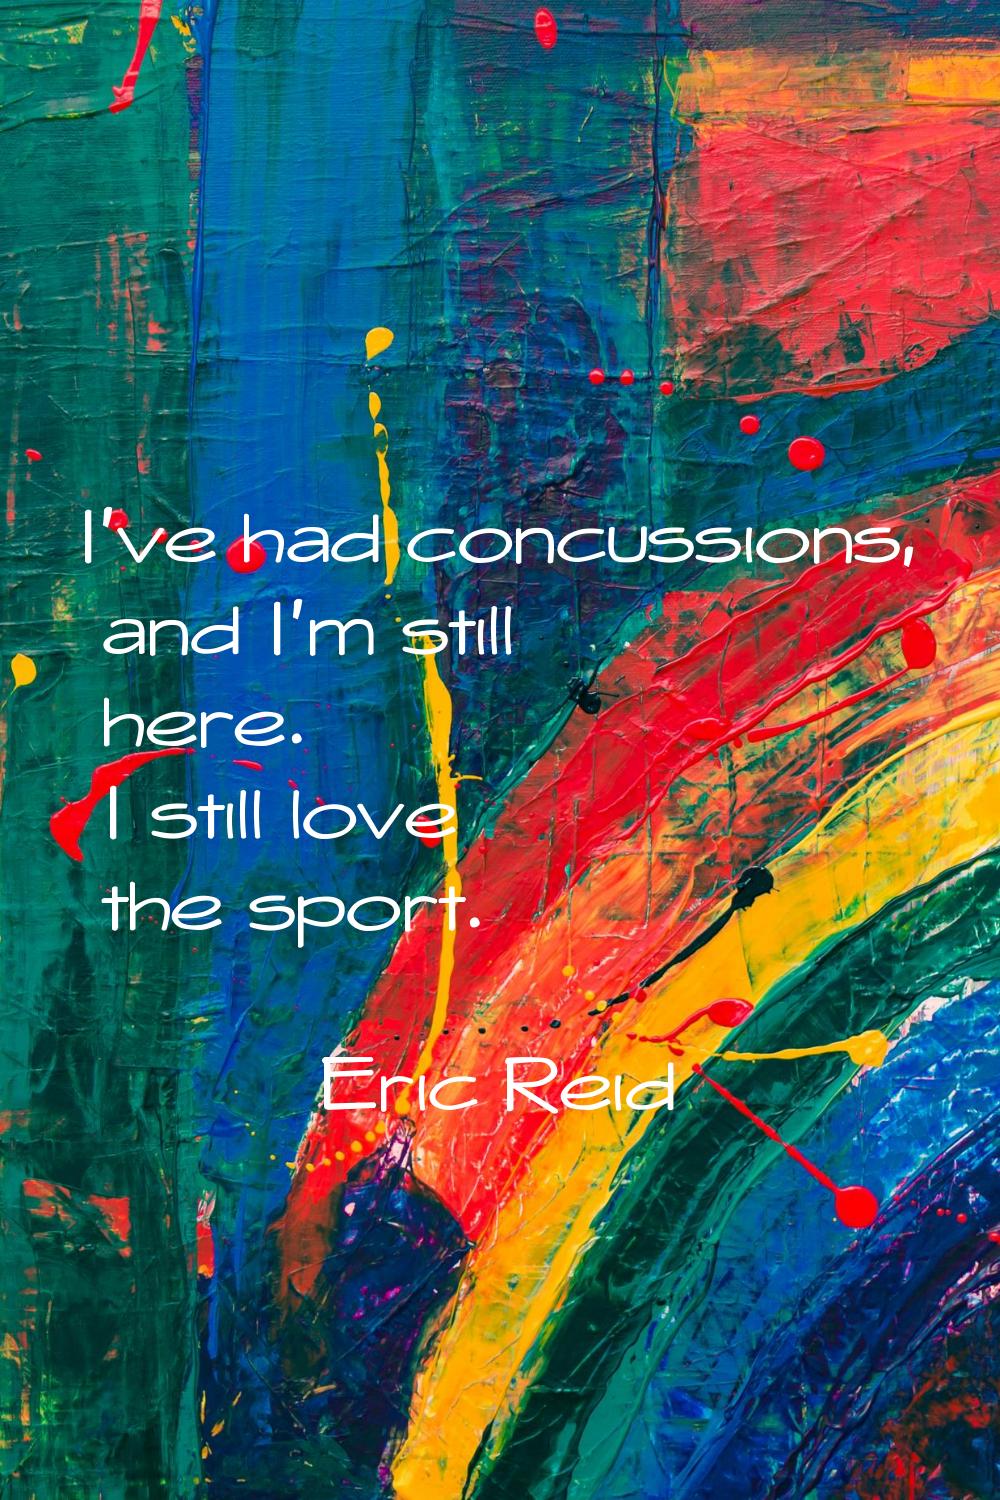 I've had concussions, and I'm still here. I still love the sport.